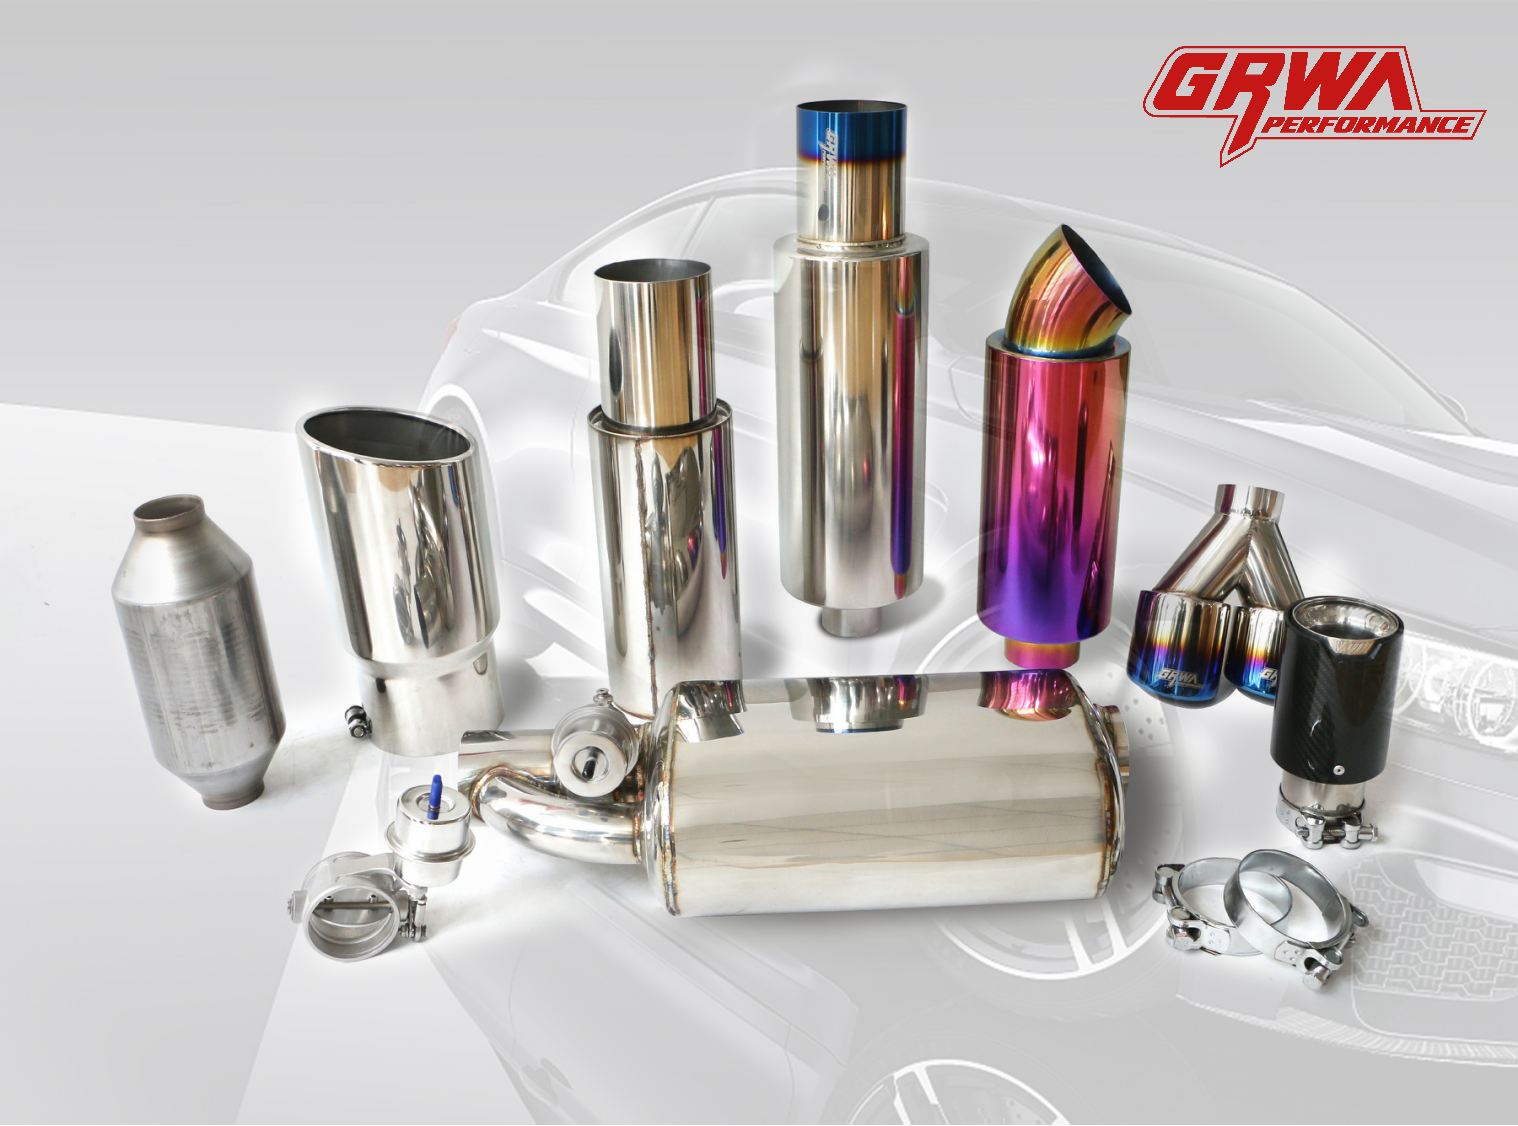 #New Year Hot Sale# Exhaust System and Modified Exhaust， GRWA2022 starts, and the series of products are on sale!（1）